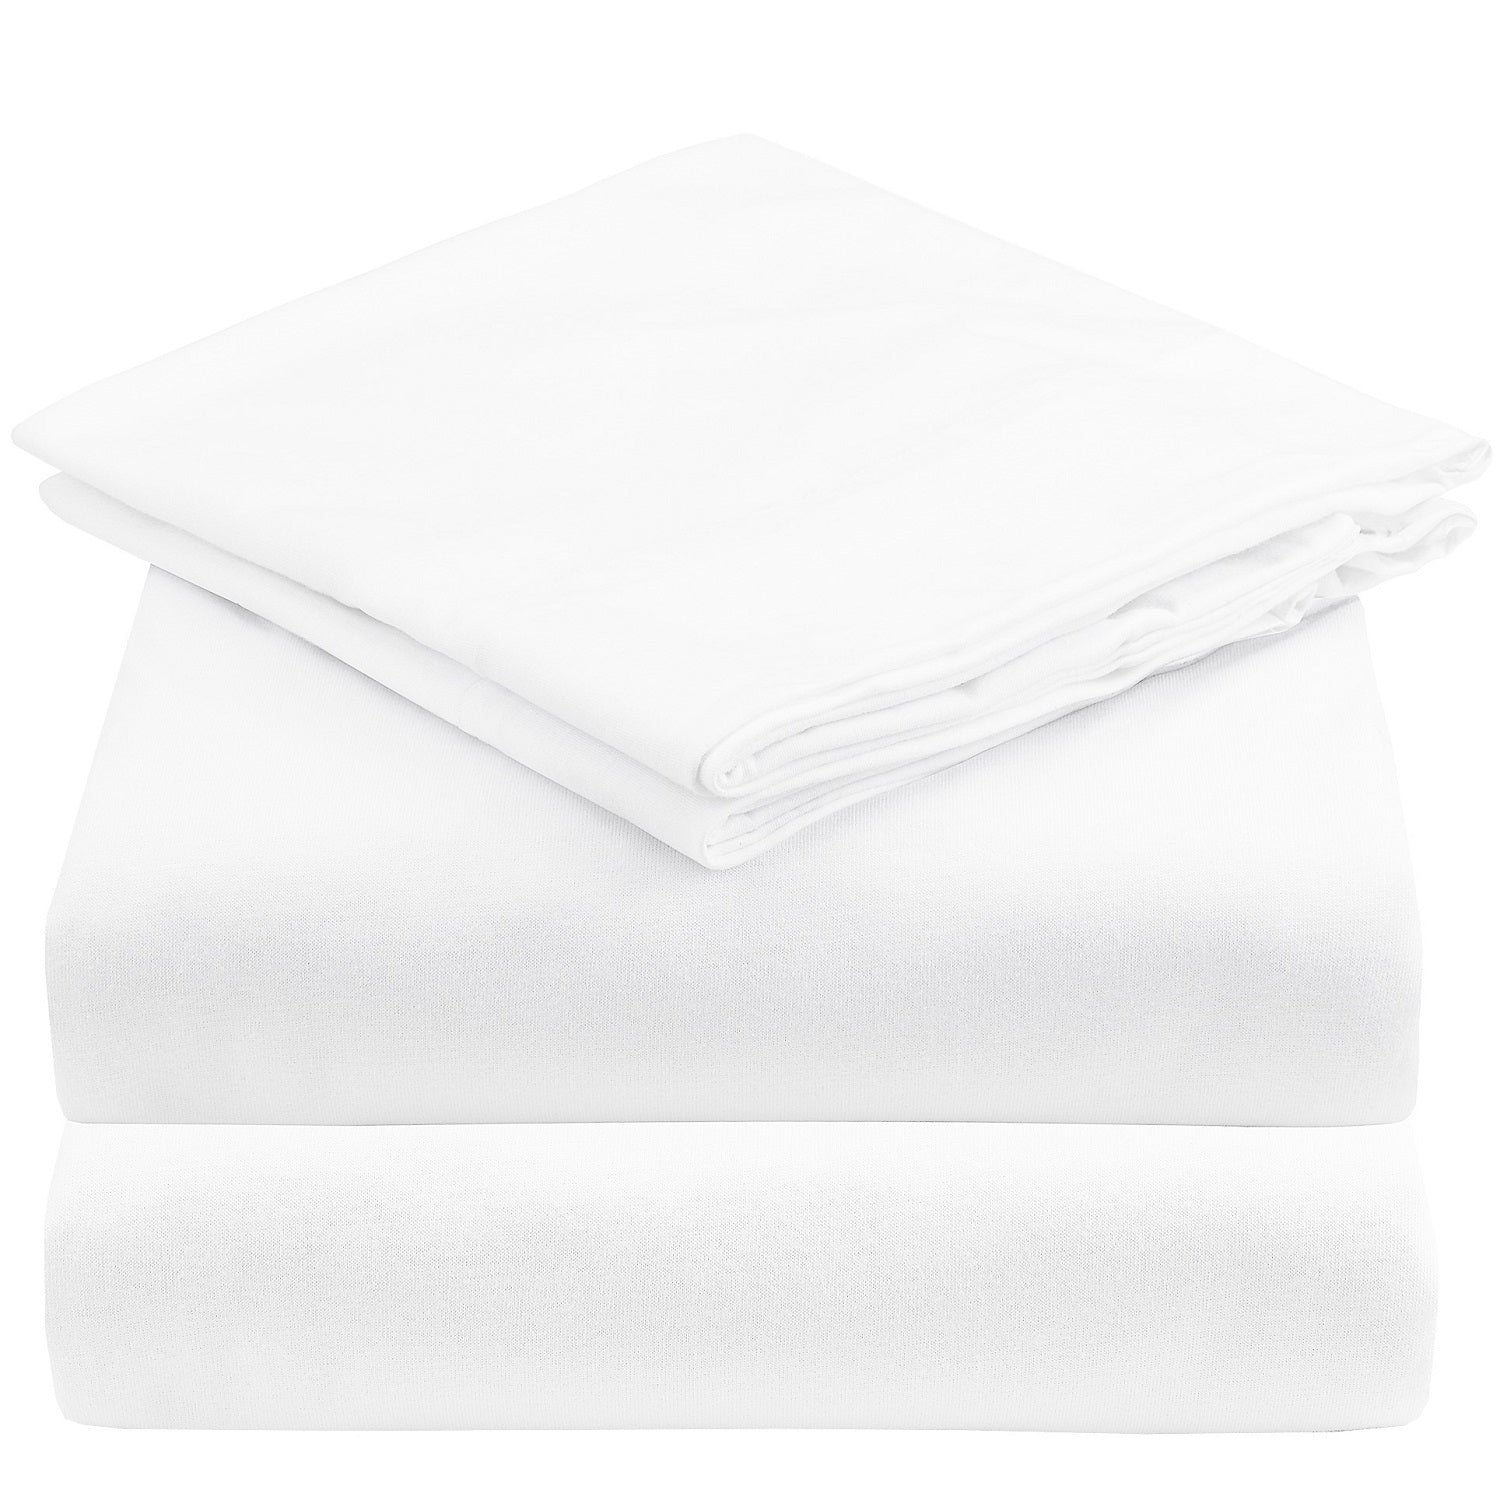 Mellanni Jersey Sheet Set 4 Piece 100% Cotton Deep Pocket Bed Sheets and Pillowcases, Queen, White - image 2 of 9